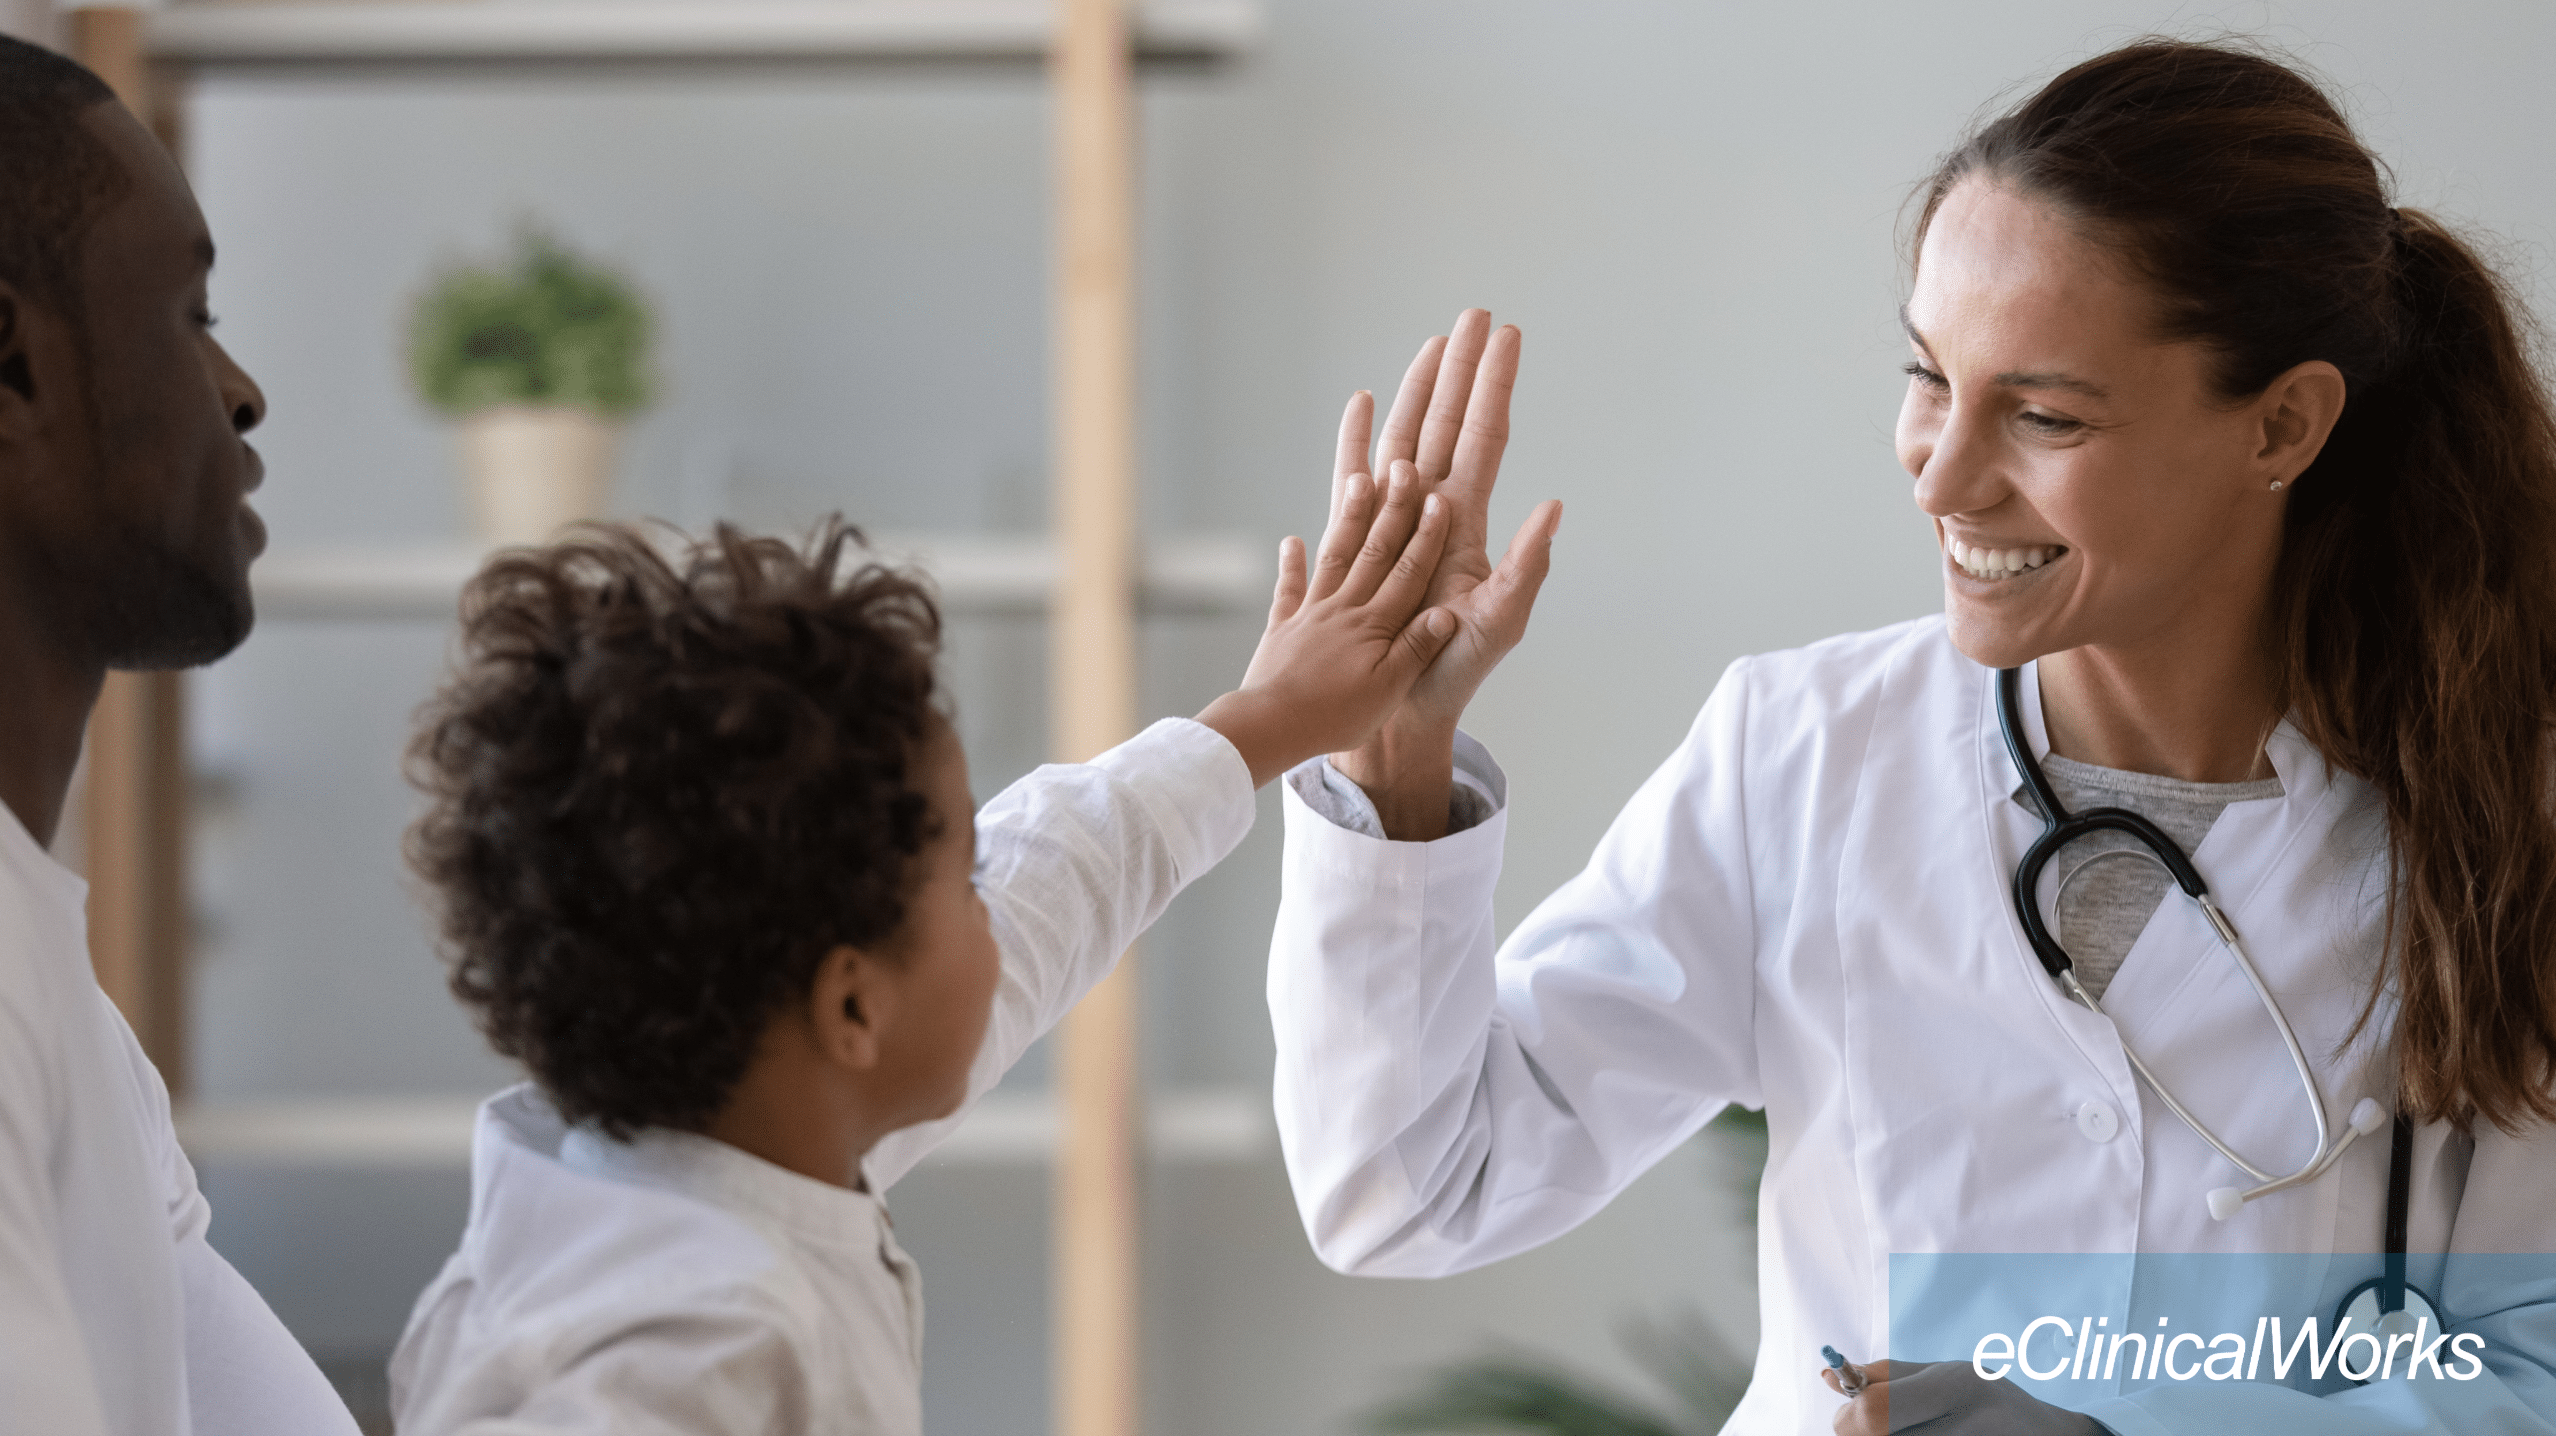 Provider high-fiving child patient in lap of parent with the eClinicalWorks logo in white in the lower right corner